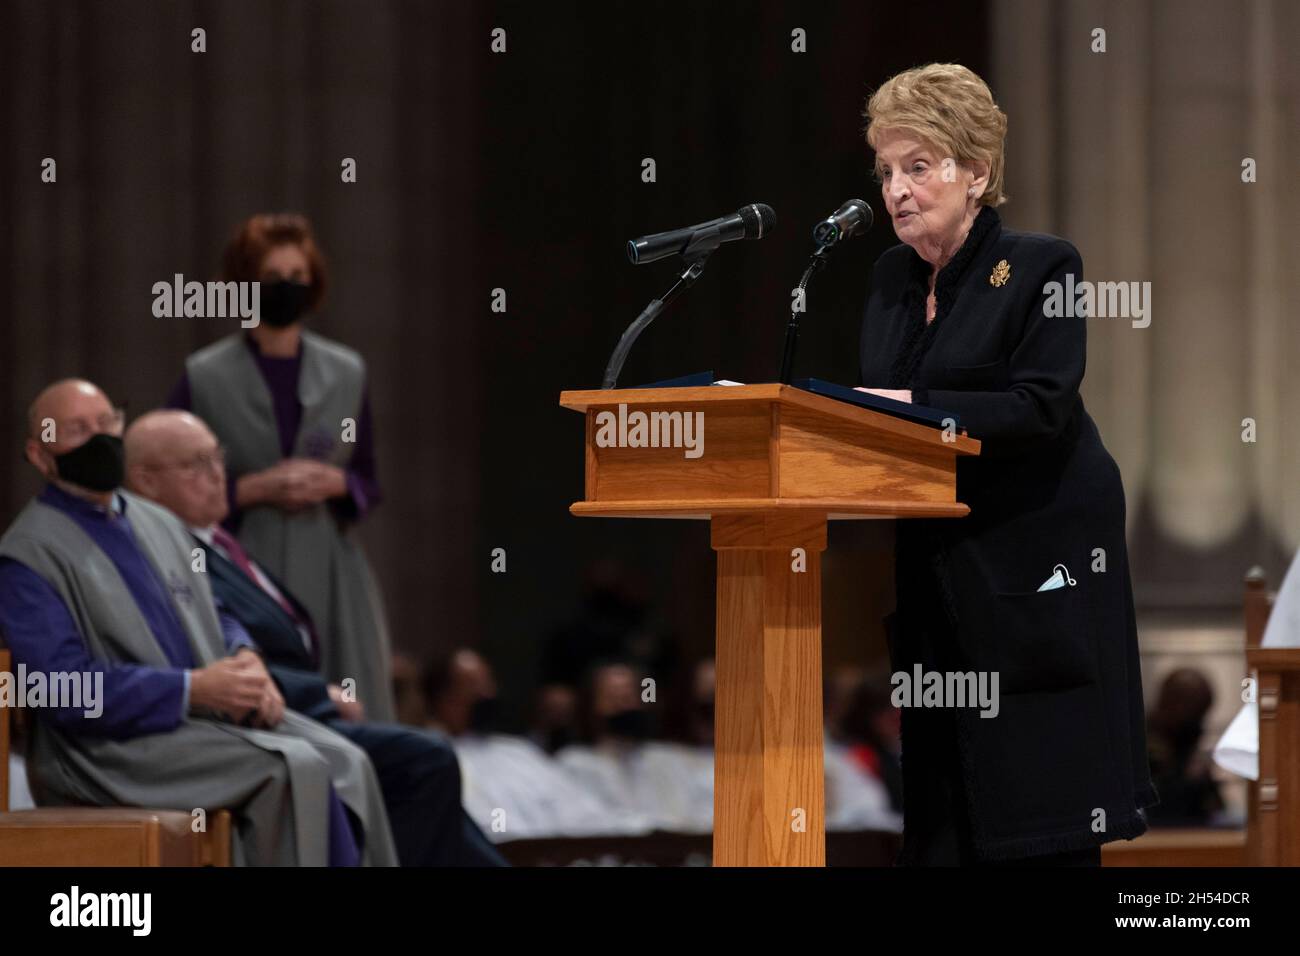 Washington, United States. 05th Nov, 2021. Former U.S. Secretary of State Madeleine K. Albright speaks during the funeral service honoring the late Gen. Colin Powell at Washington National Cathedral, November 5, 2021 in Washington, DC, Nov. 5, 2021. (U.S. Army photo by ) Credit: Laura Buchta/U.S. Army/Alamy Live News Stock Photo